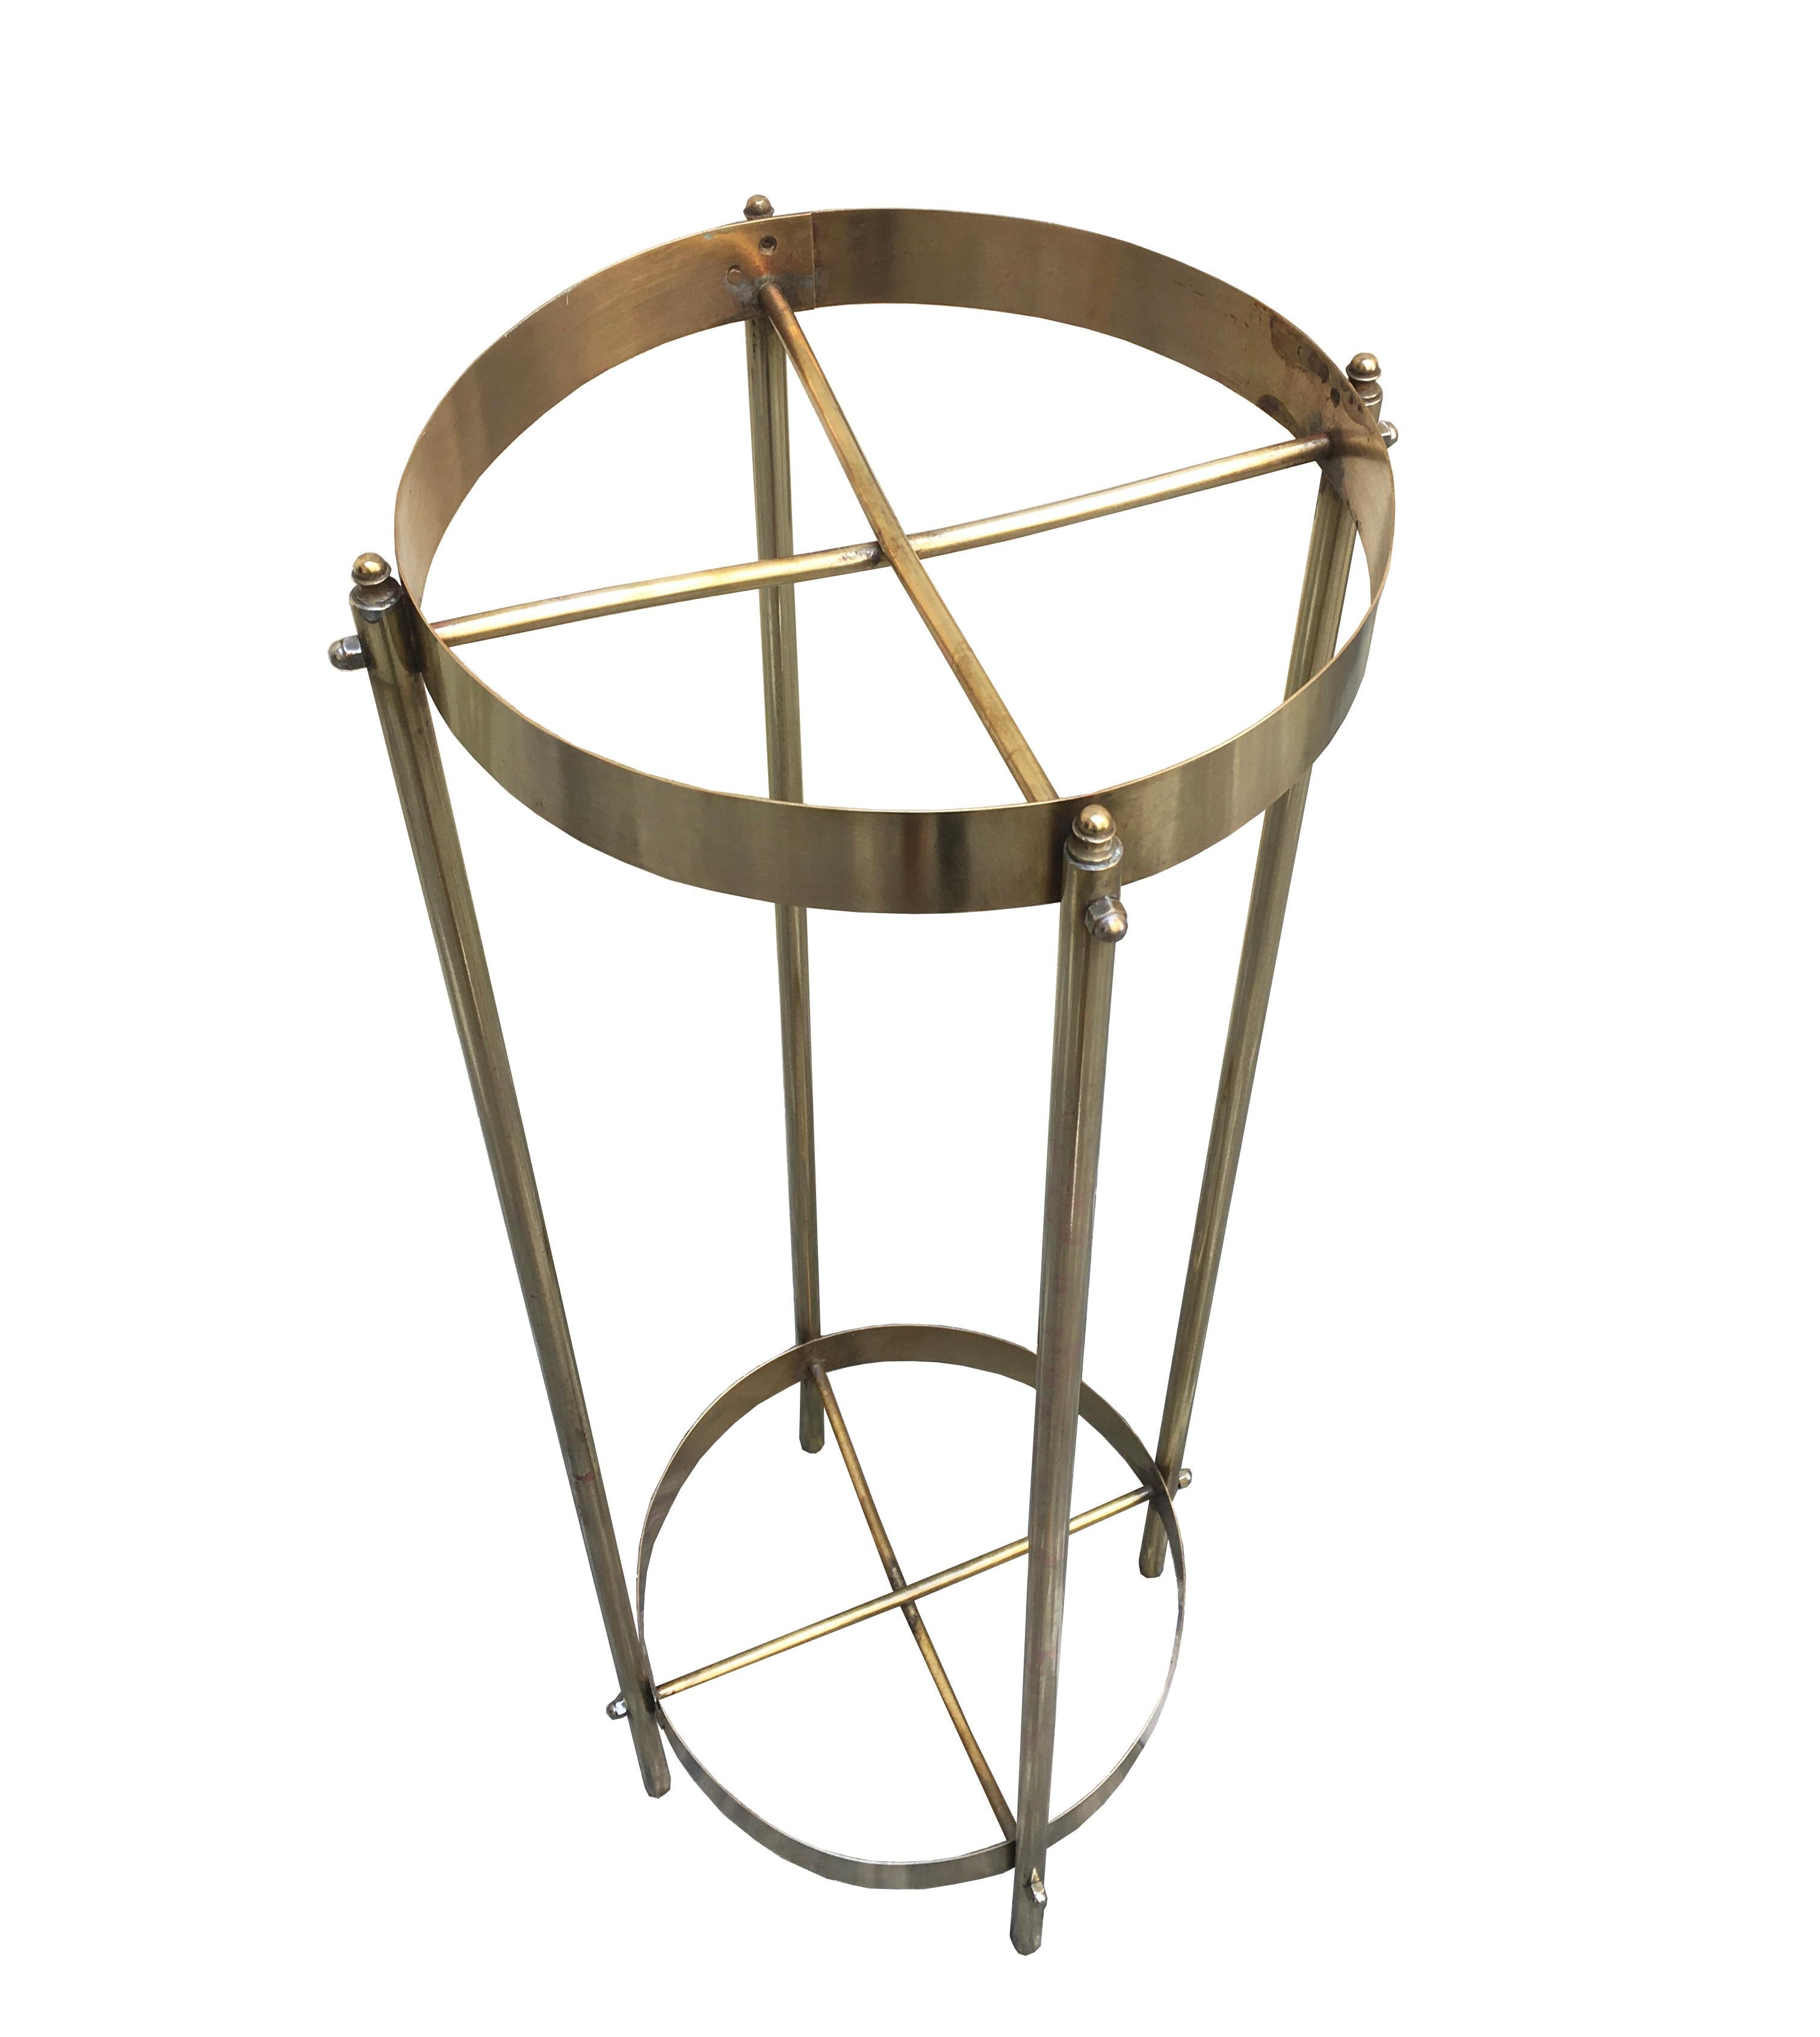 Beautiful brass plant holder made in Italy in the 1960s. It is in polished brass with 2 shelves, which can also be used as an elegant pedestal.